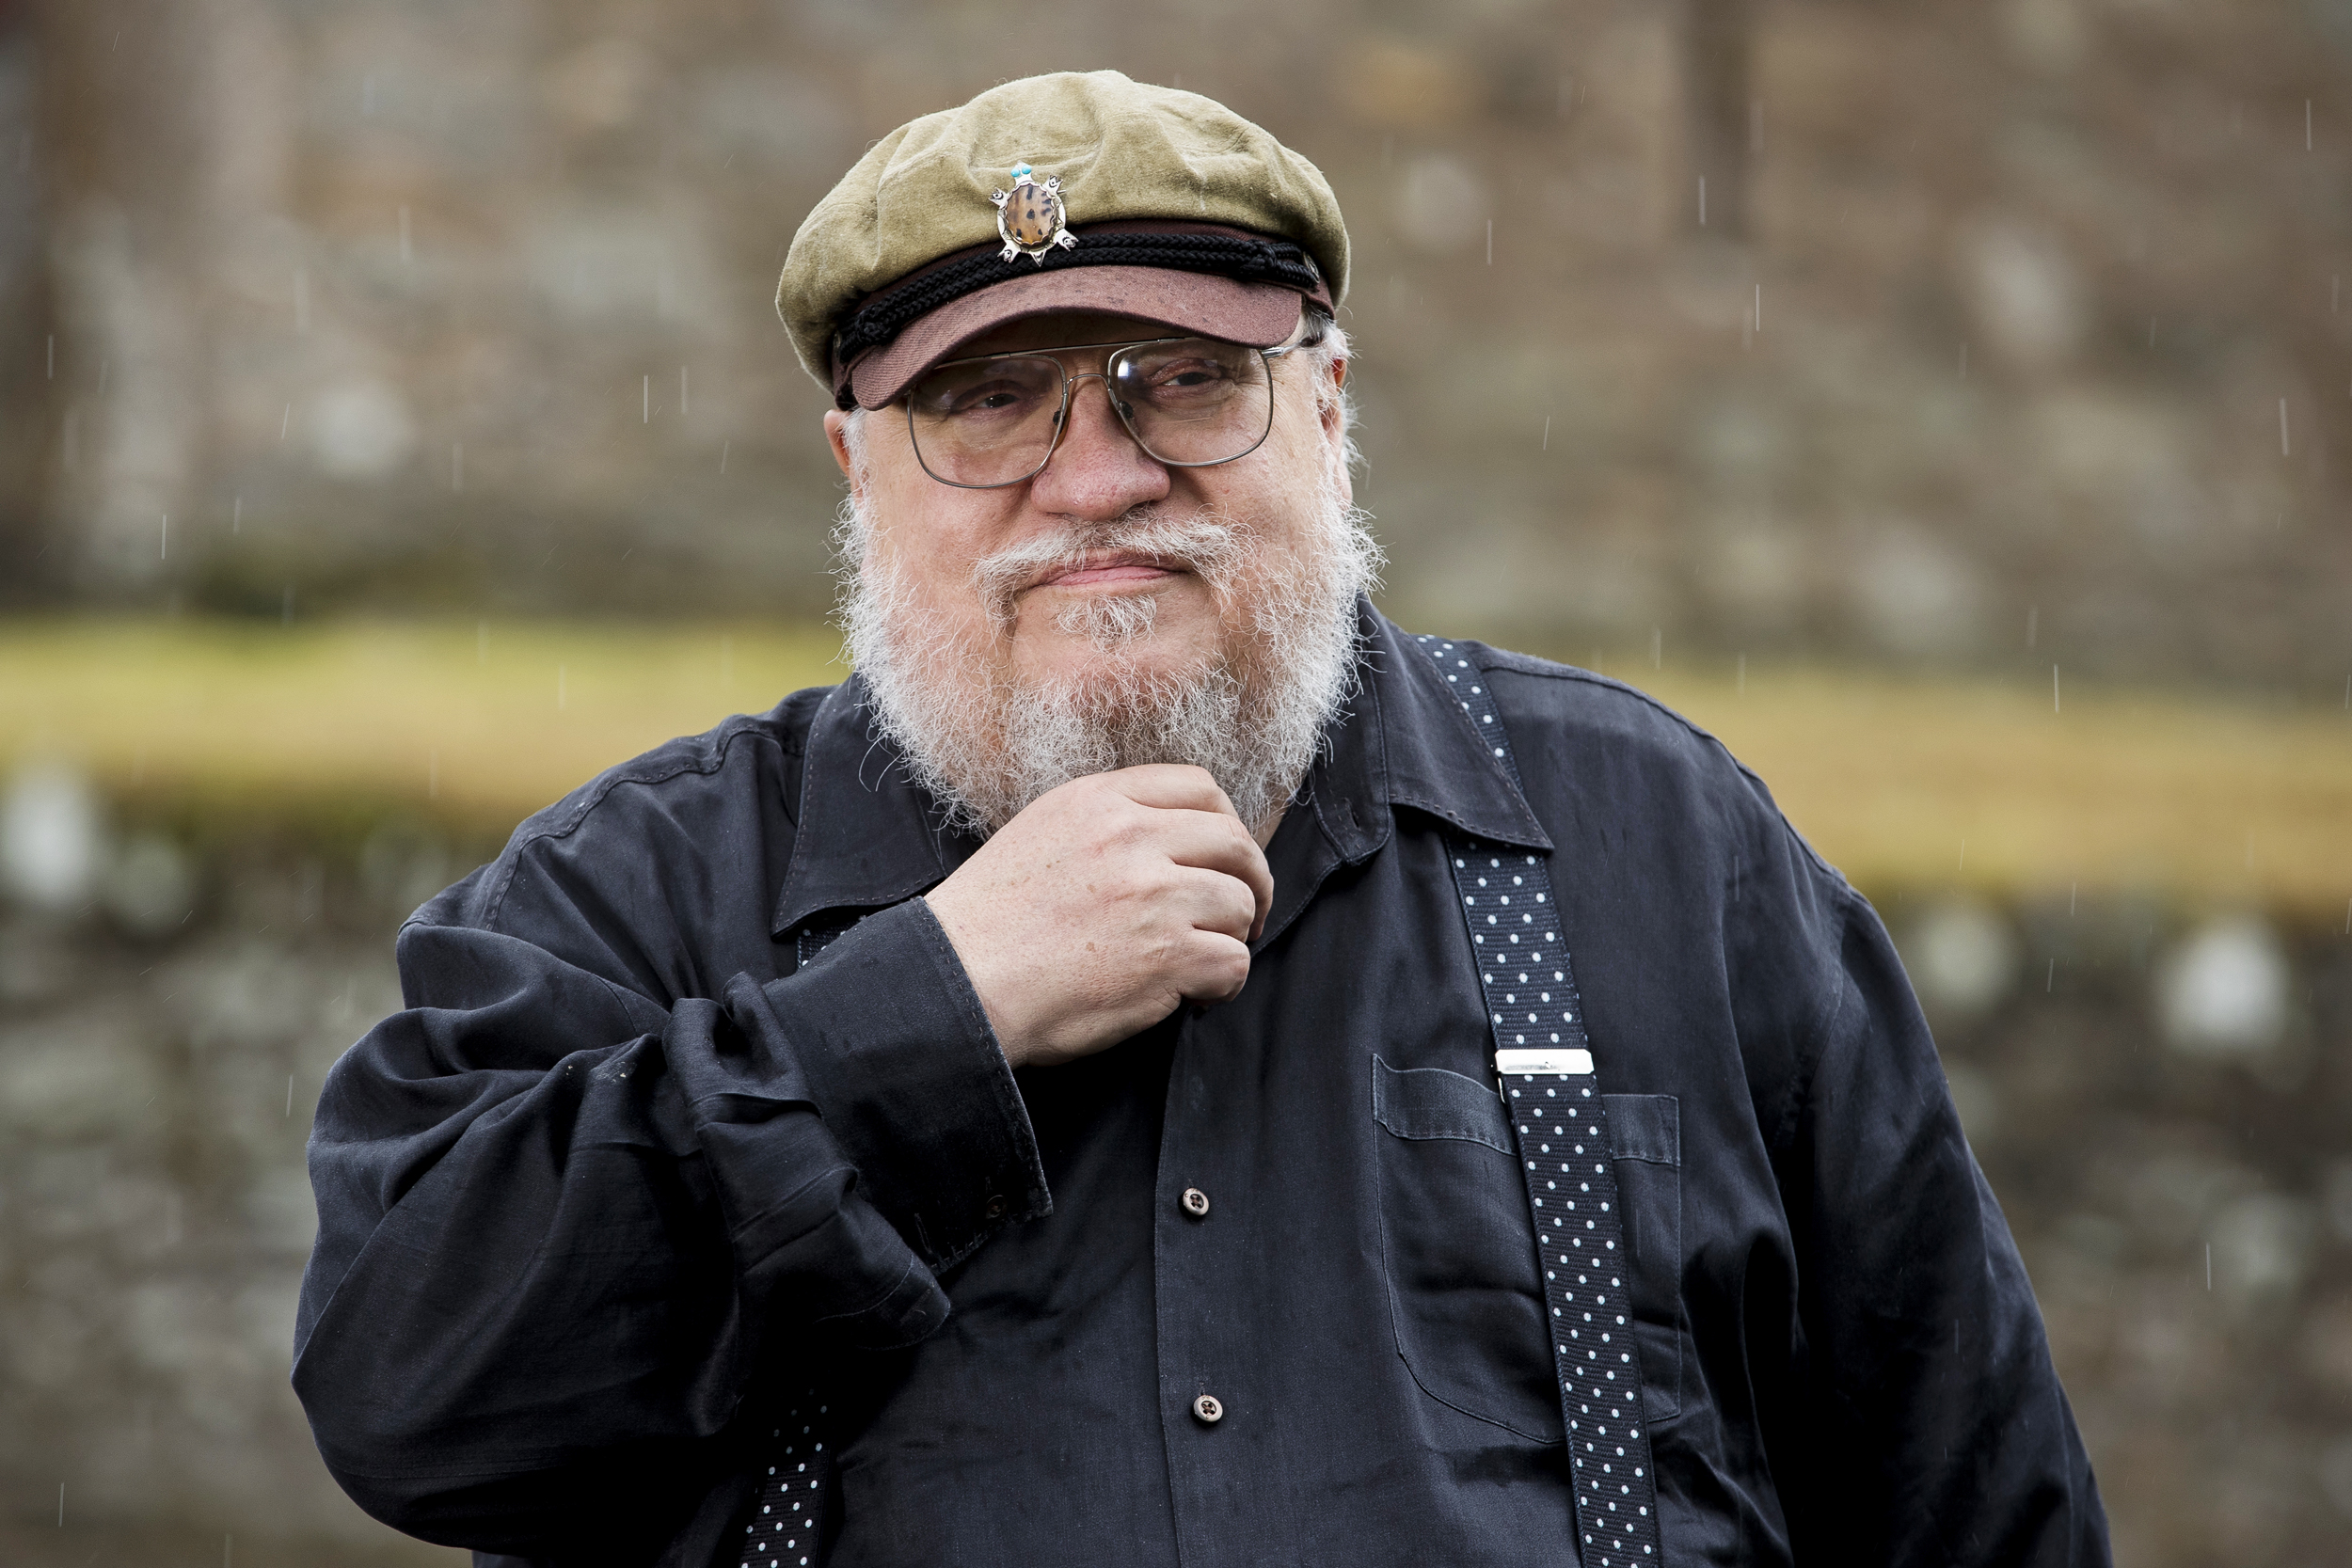 Game of Thrones AI Completed Books Removed After Being Named In George R.R. Martin Lawsuit